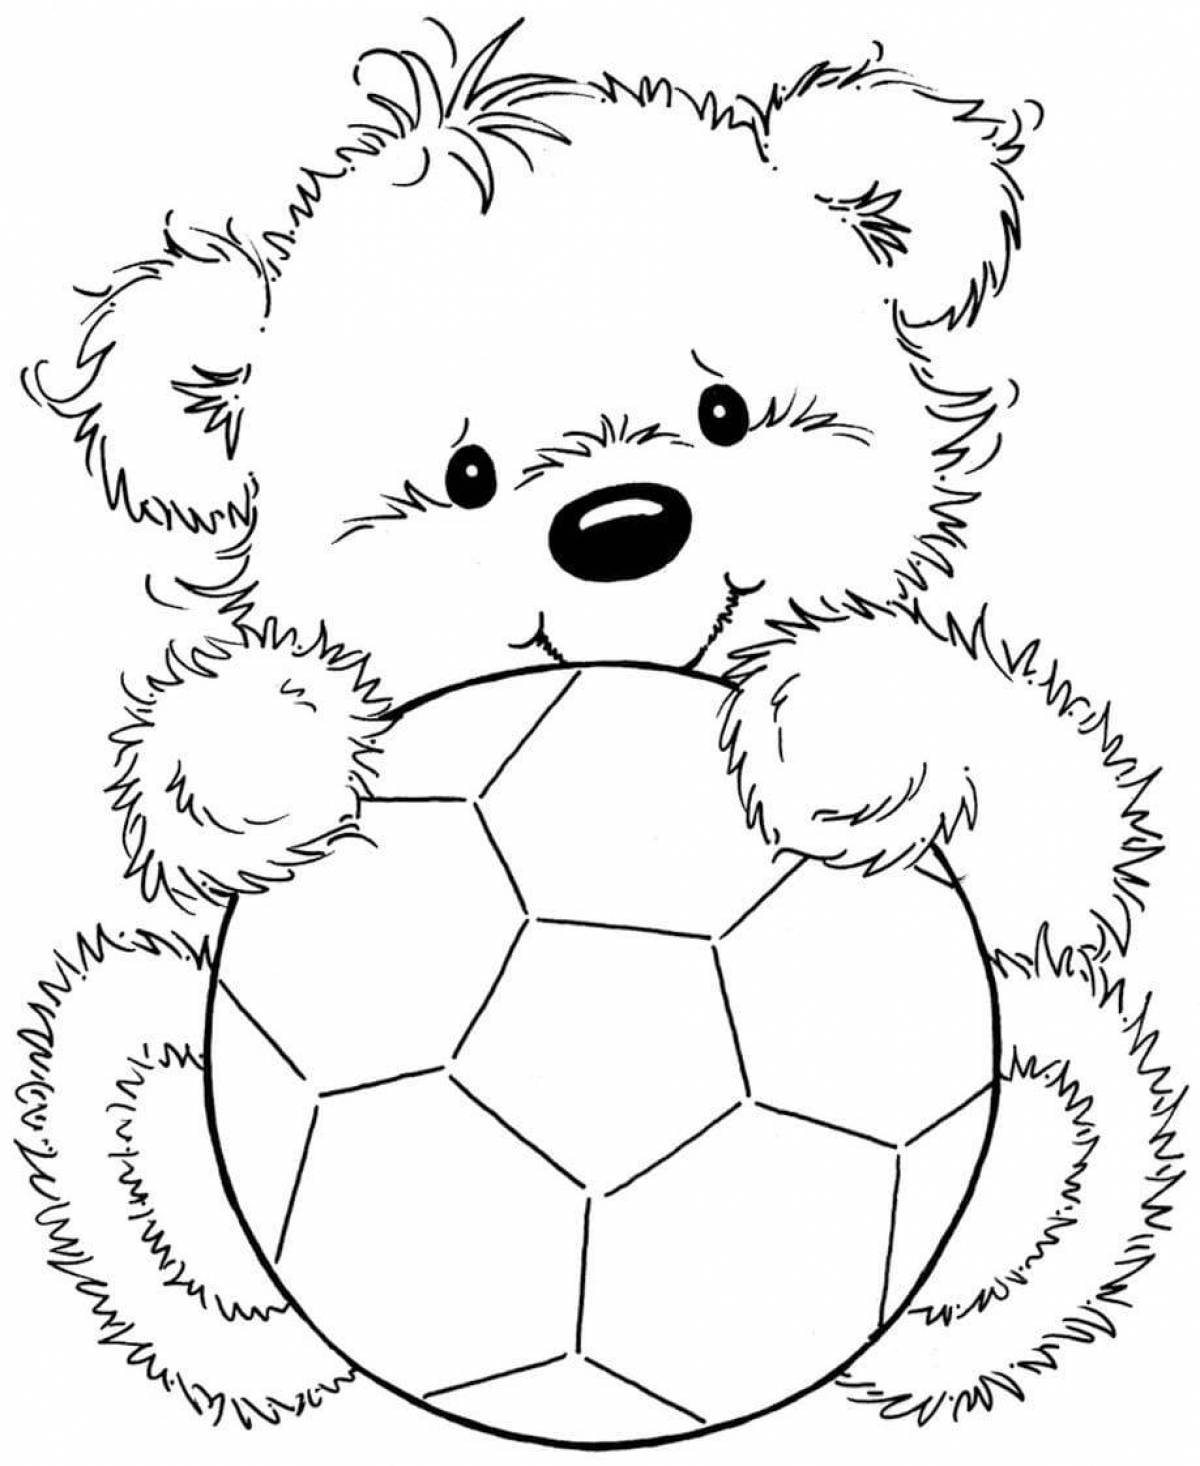 Loving teddy bear coloring page